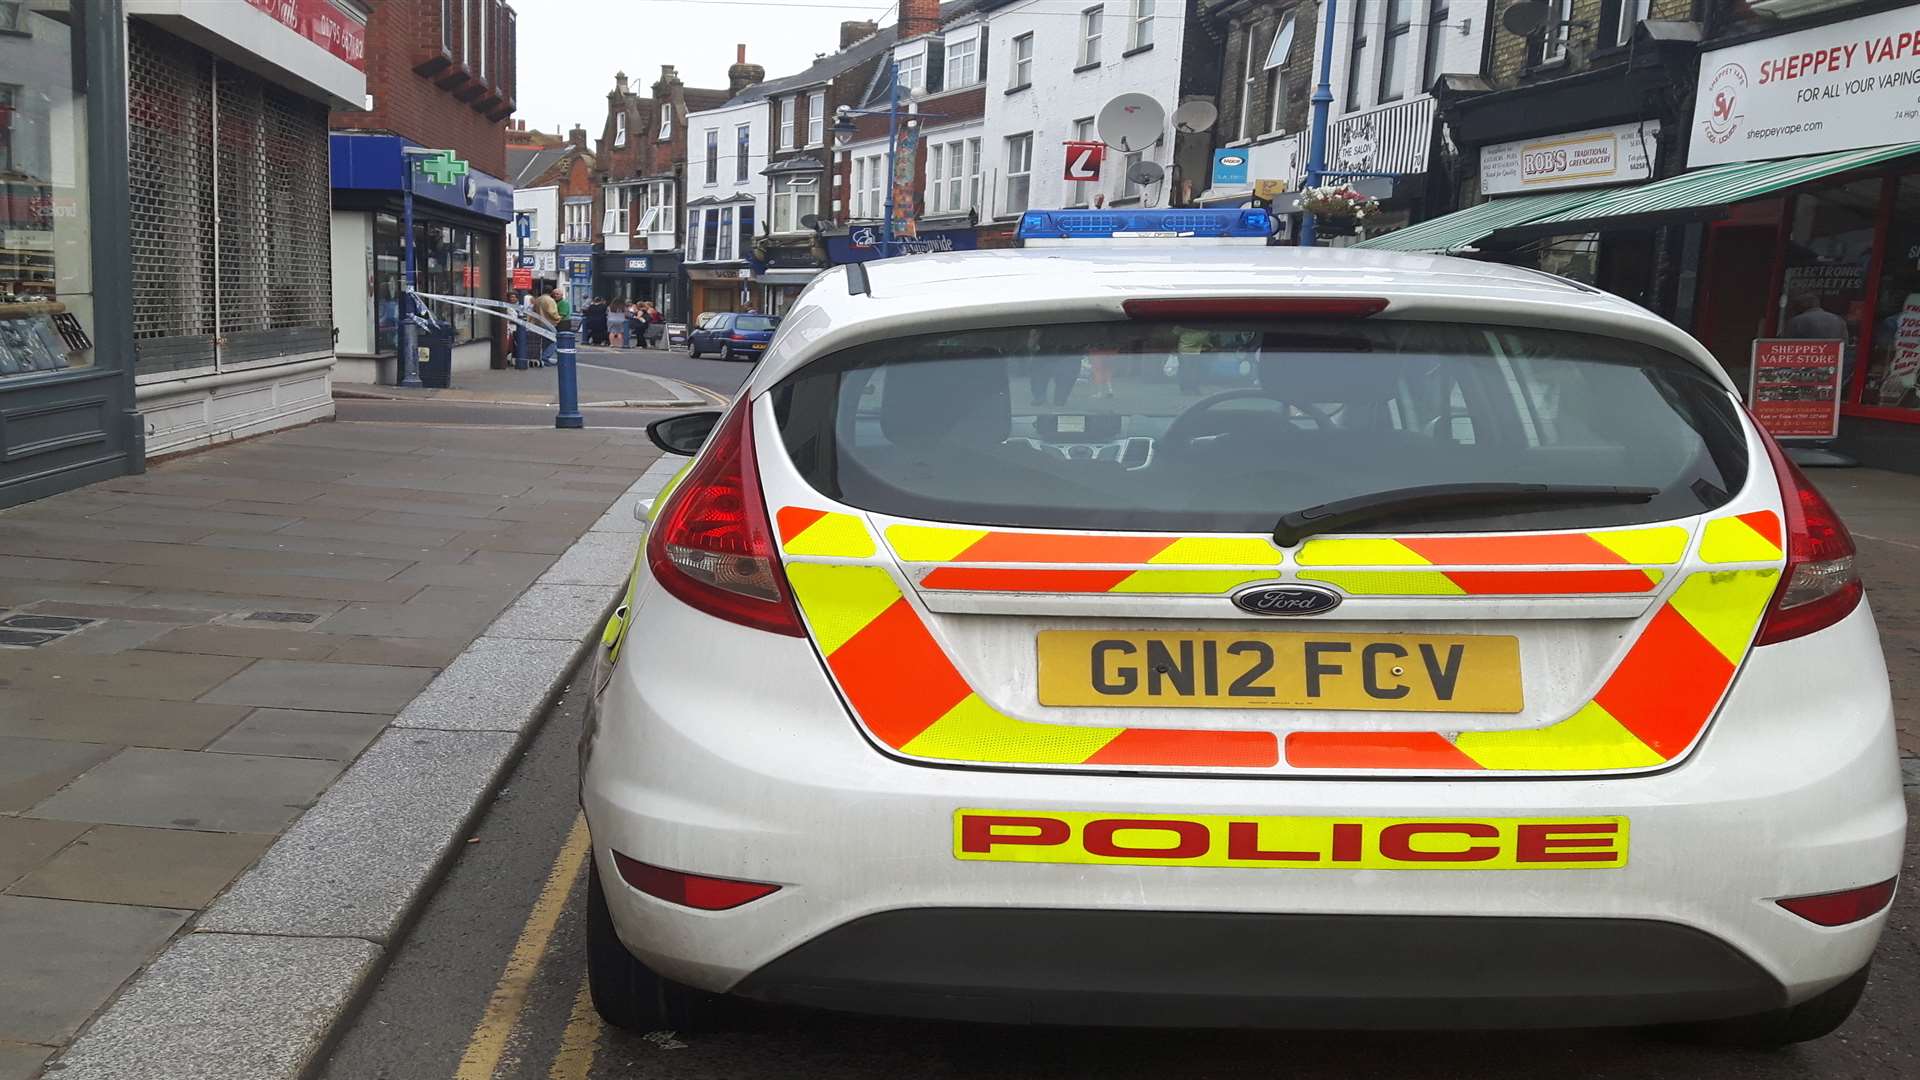 Police have responded to thousands of incidents since January